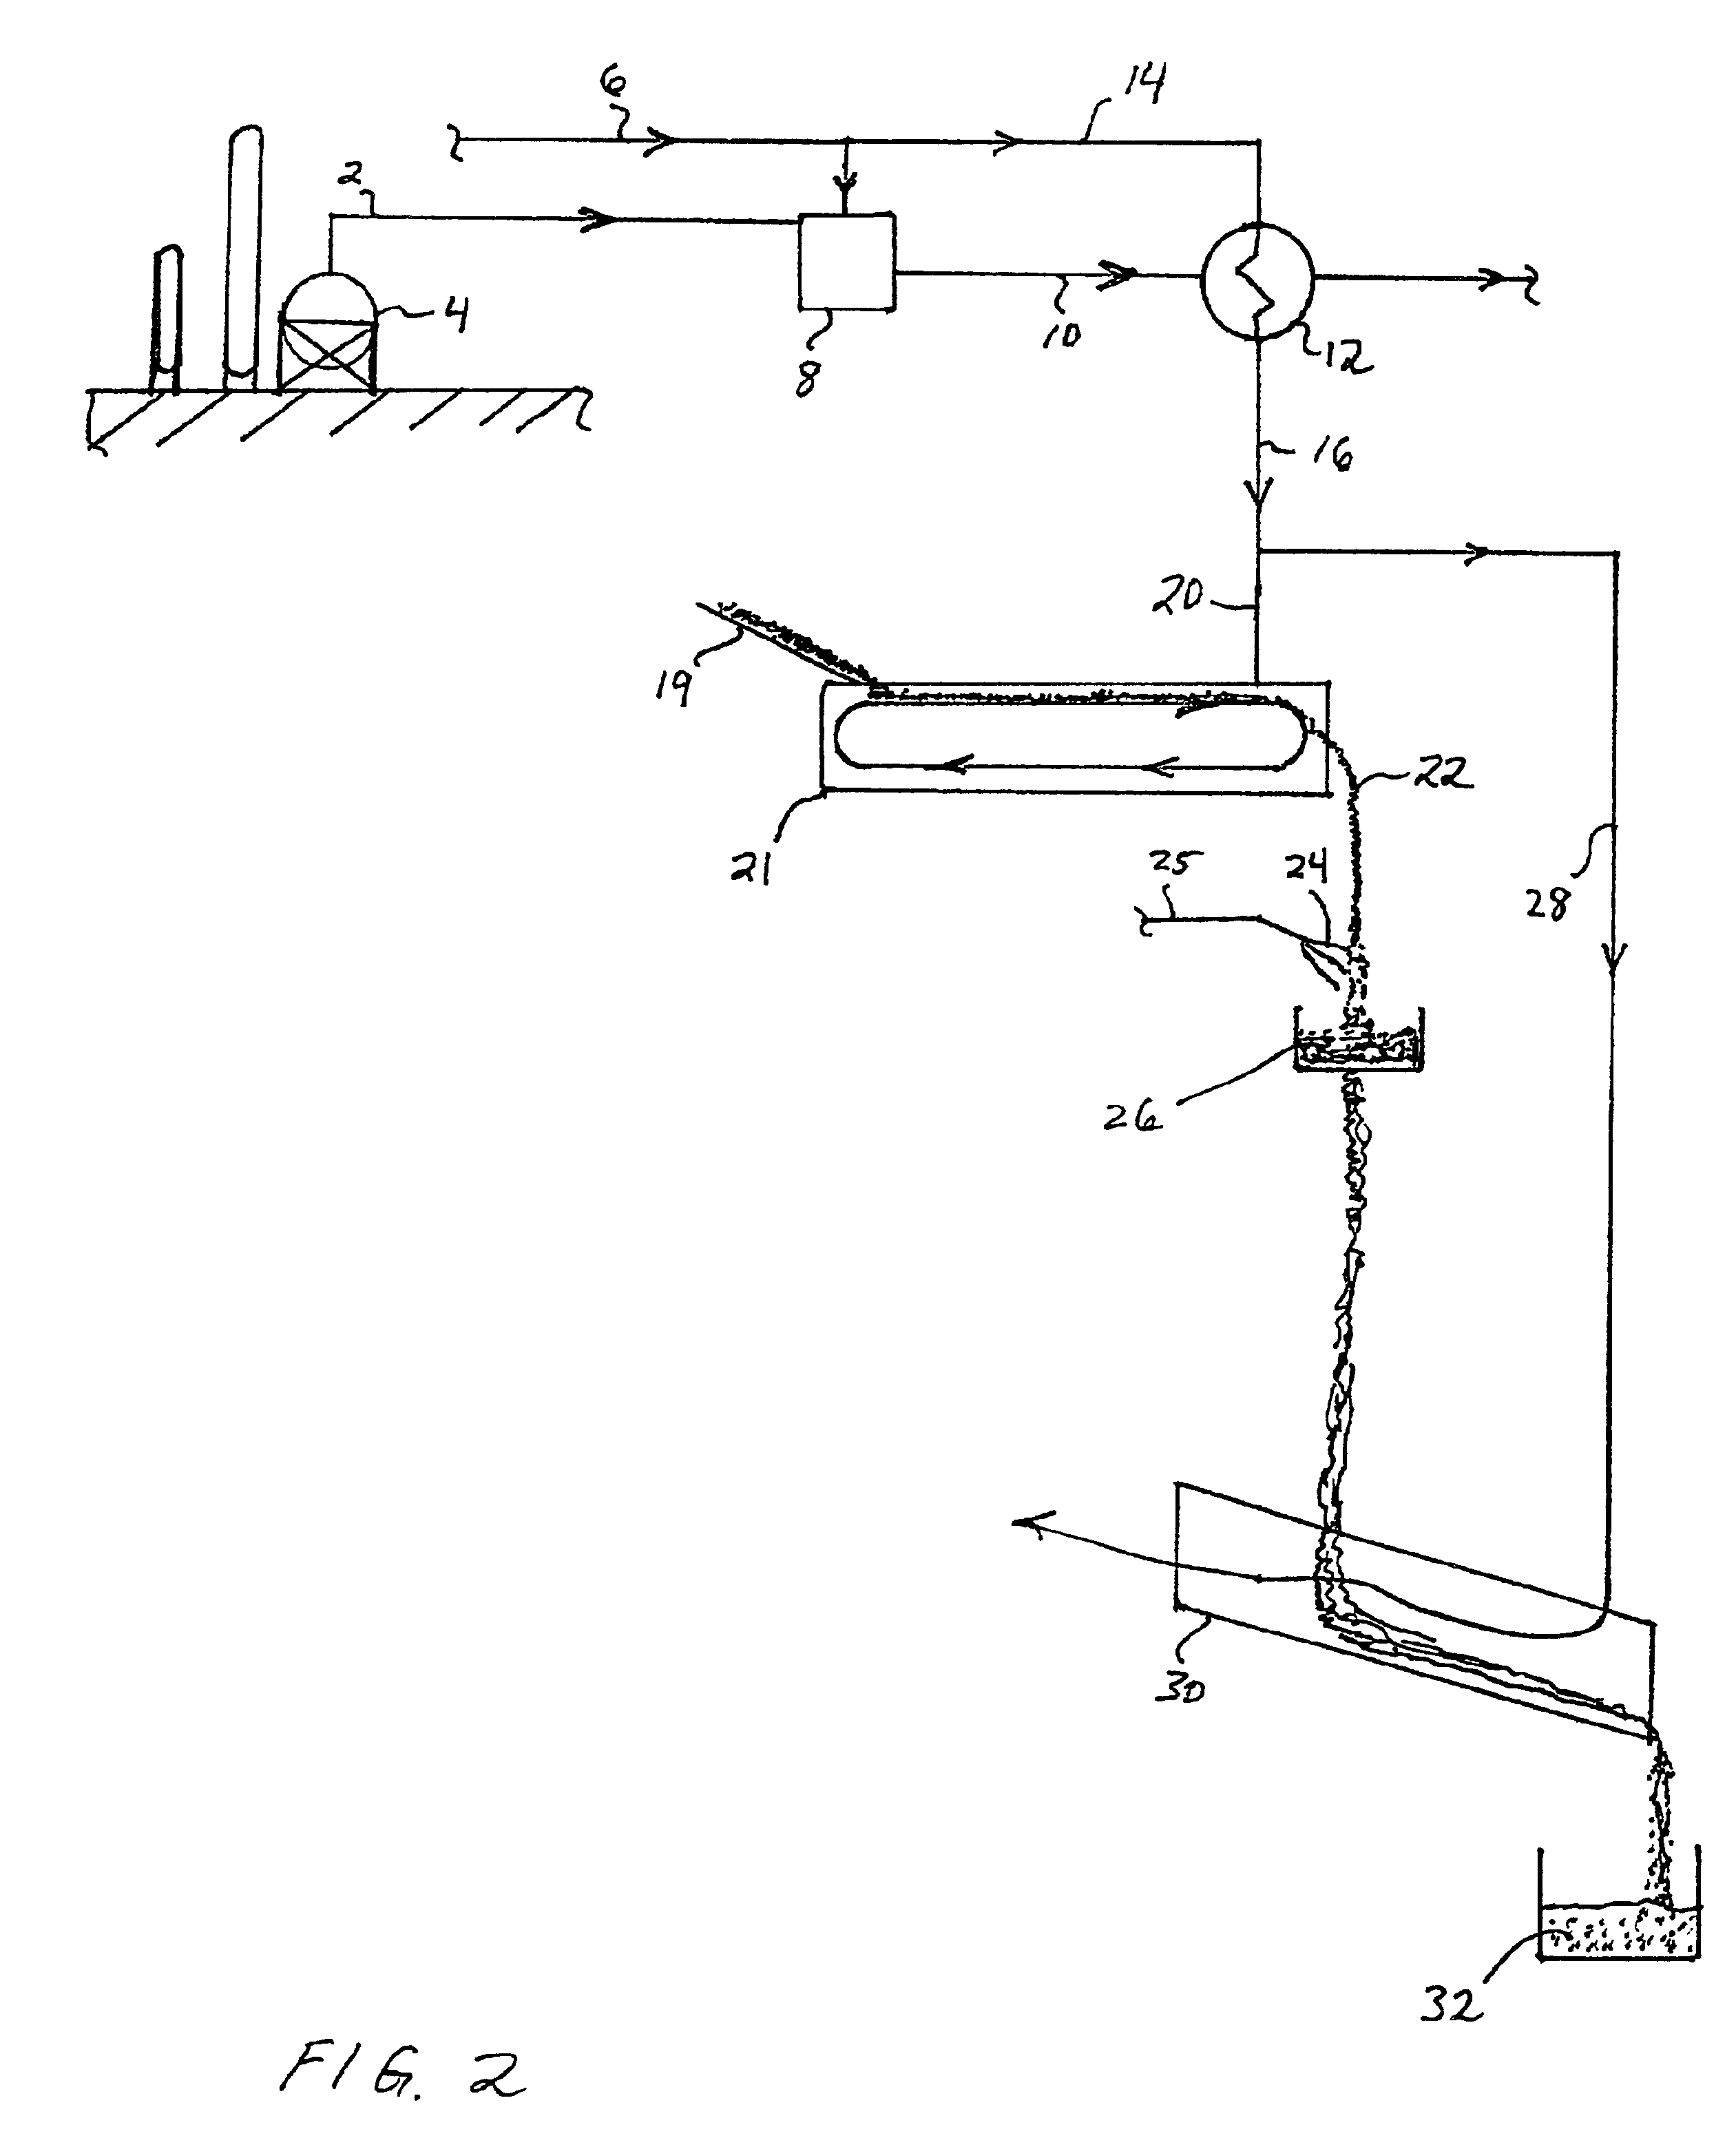 Fertilizer compositions and methods of making and using same